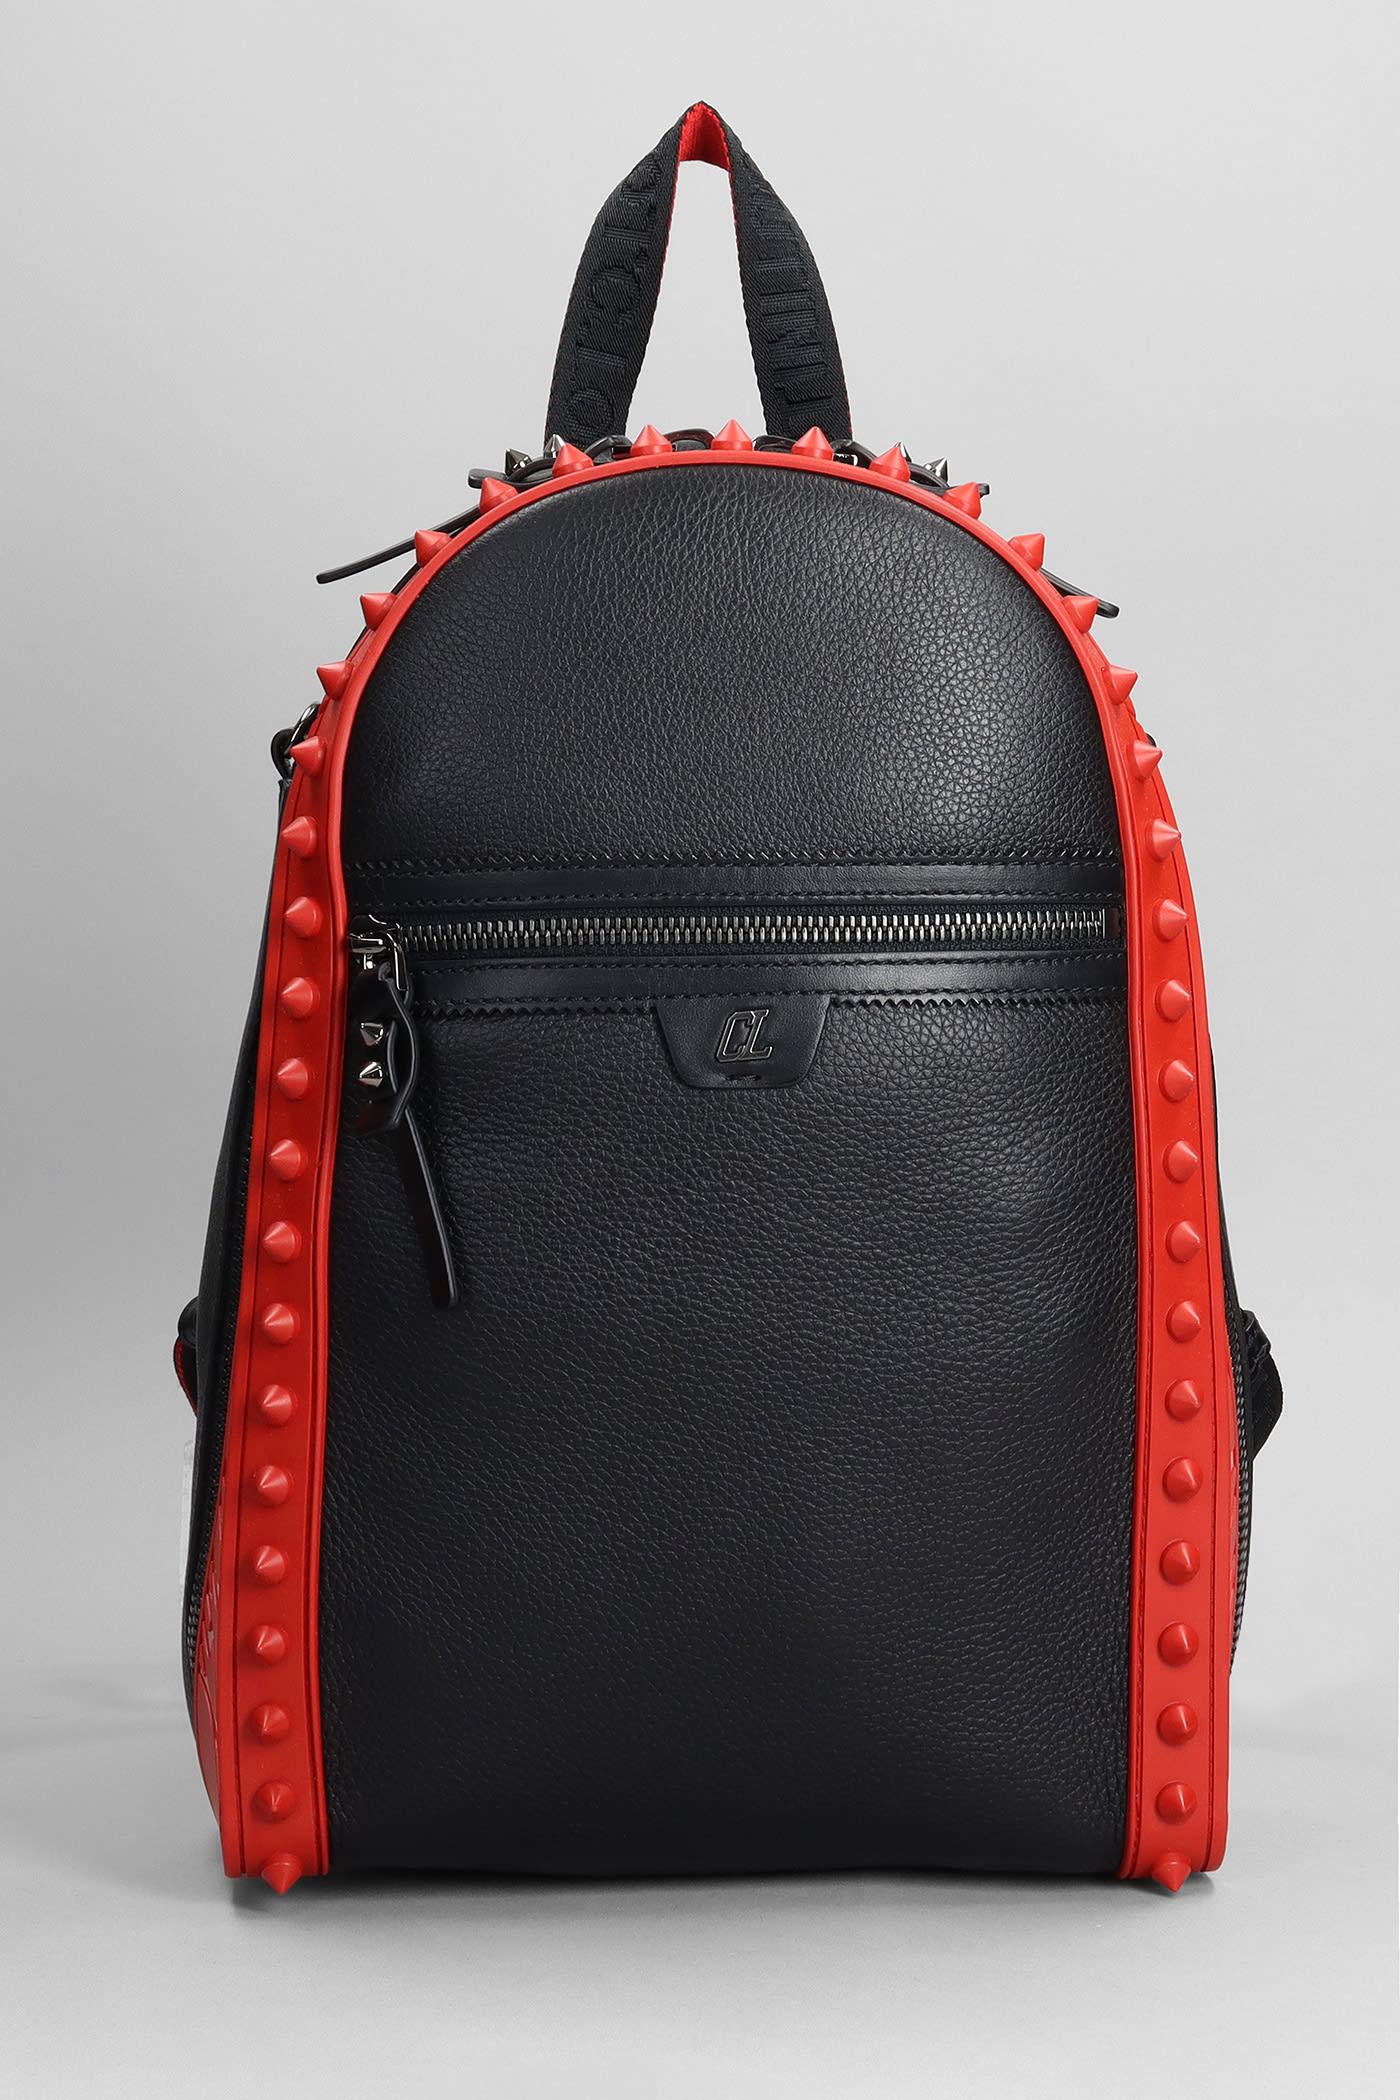 Christian Louboutin Backpack In Leather in Black for Men